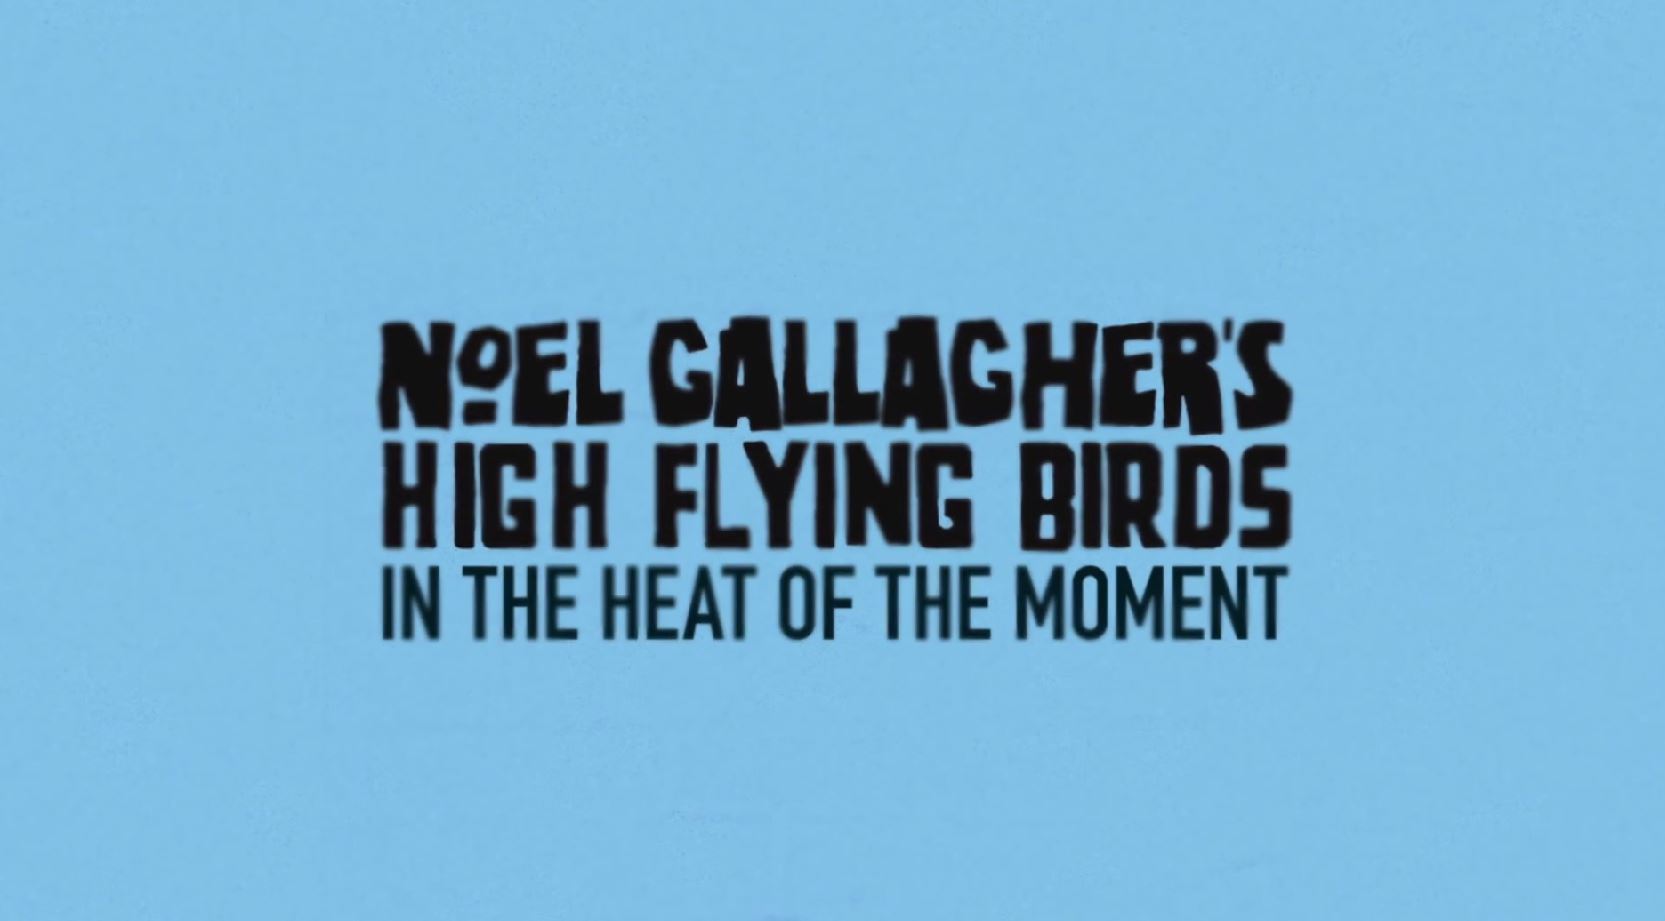 Noel Gallagher - In the Heat of the Moment via YouTube Screen Cap